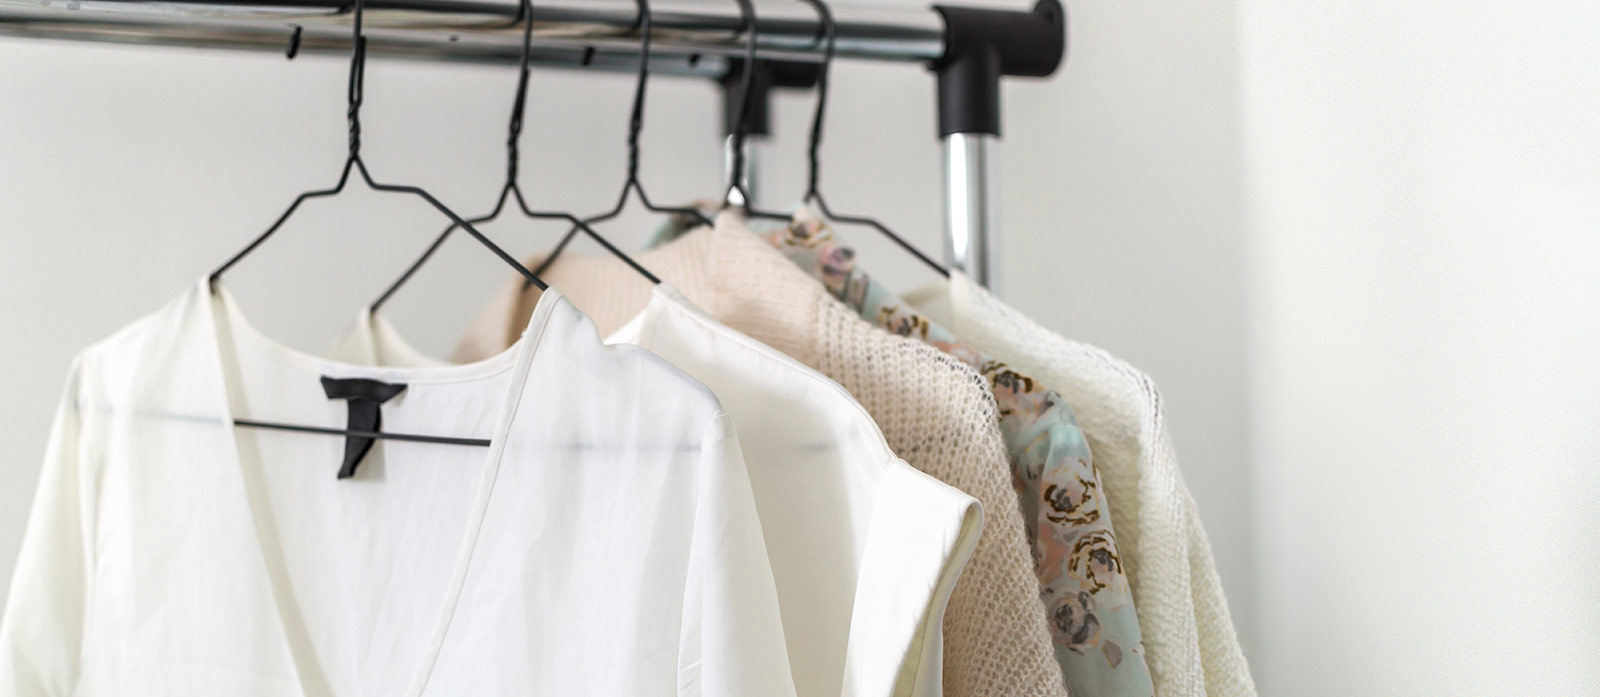 How to build your very own capsule wardrobe in 5 easy steps